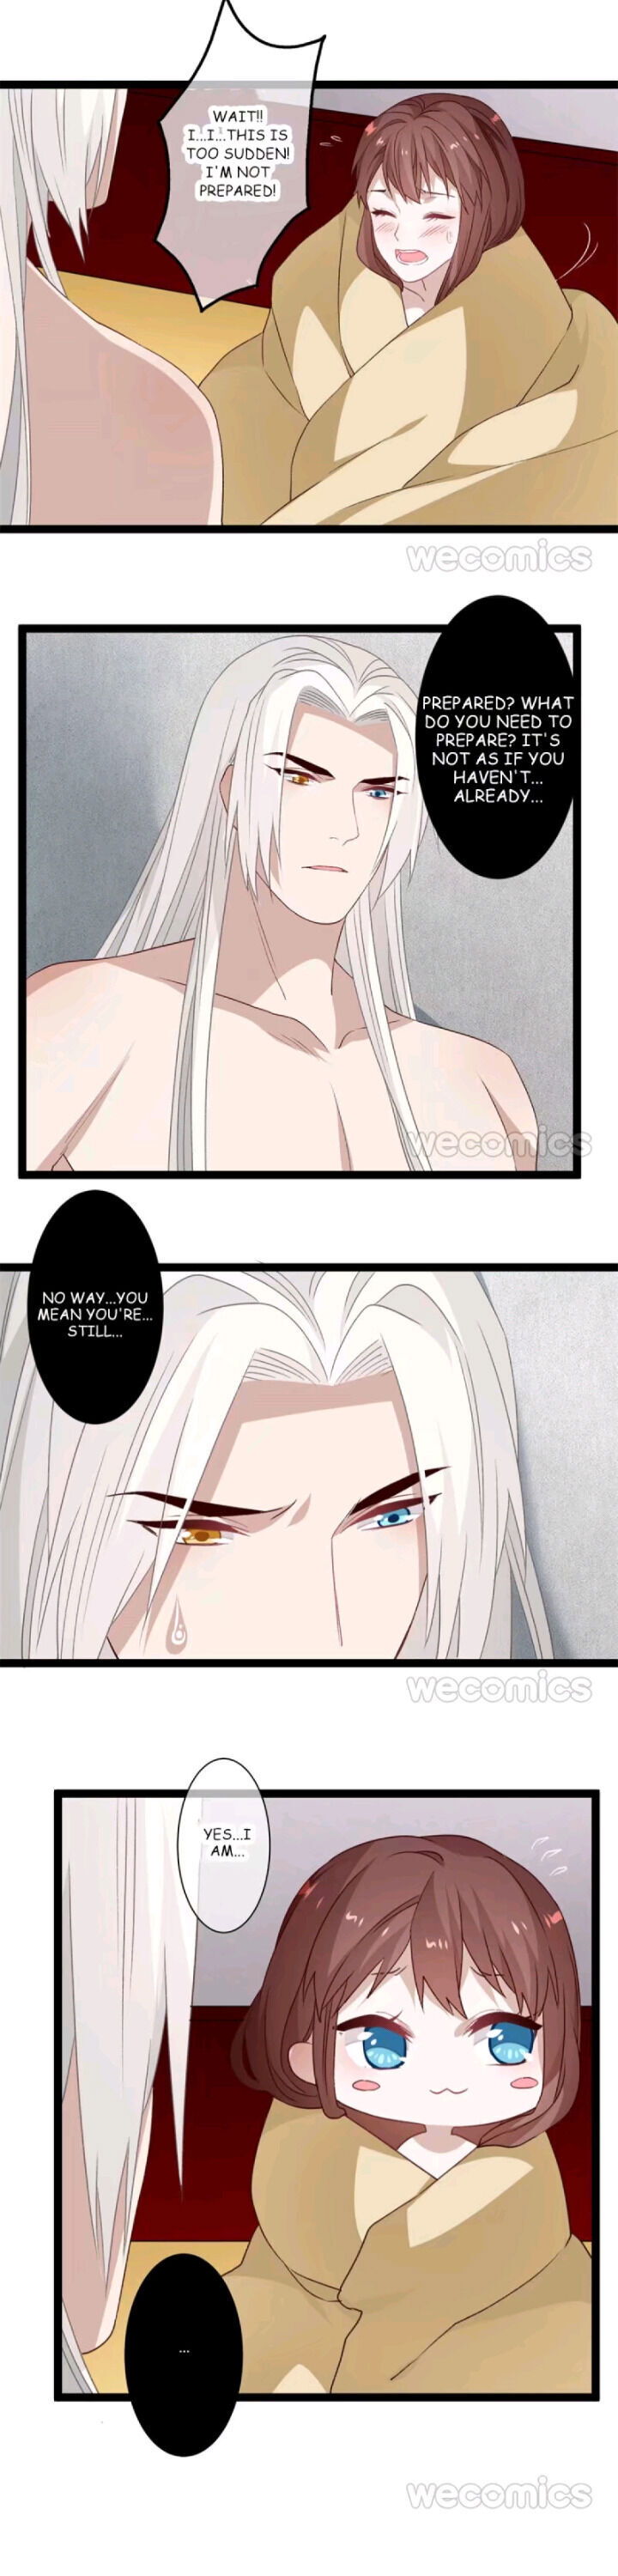 Curse of Loulan: The Tyrant Bestows Favor on Me Chapter 84 page 8